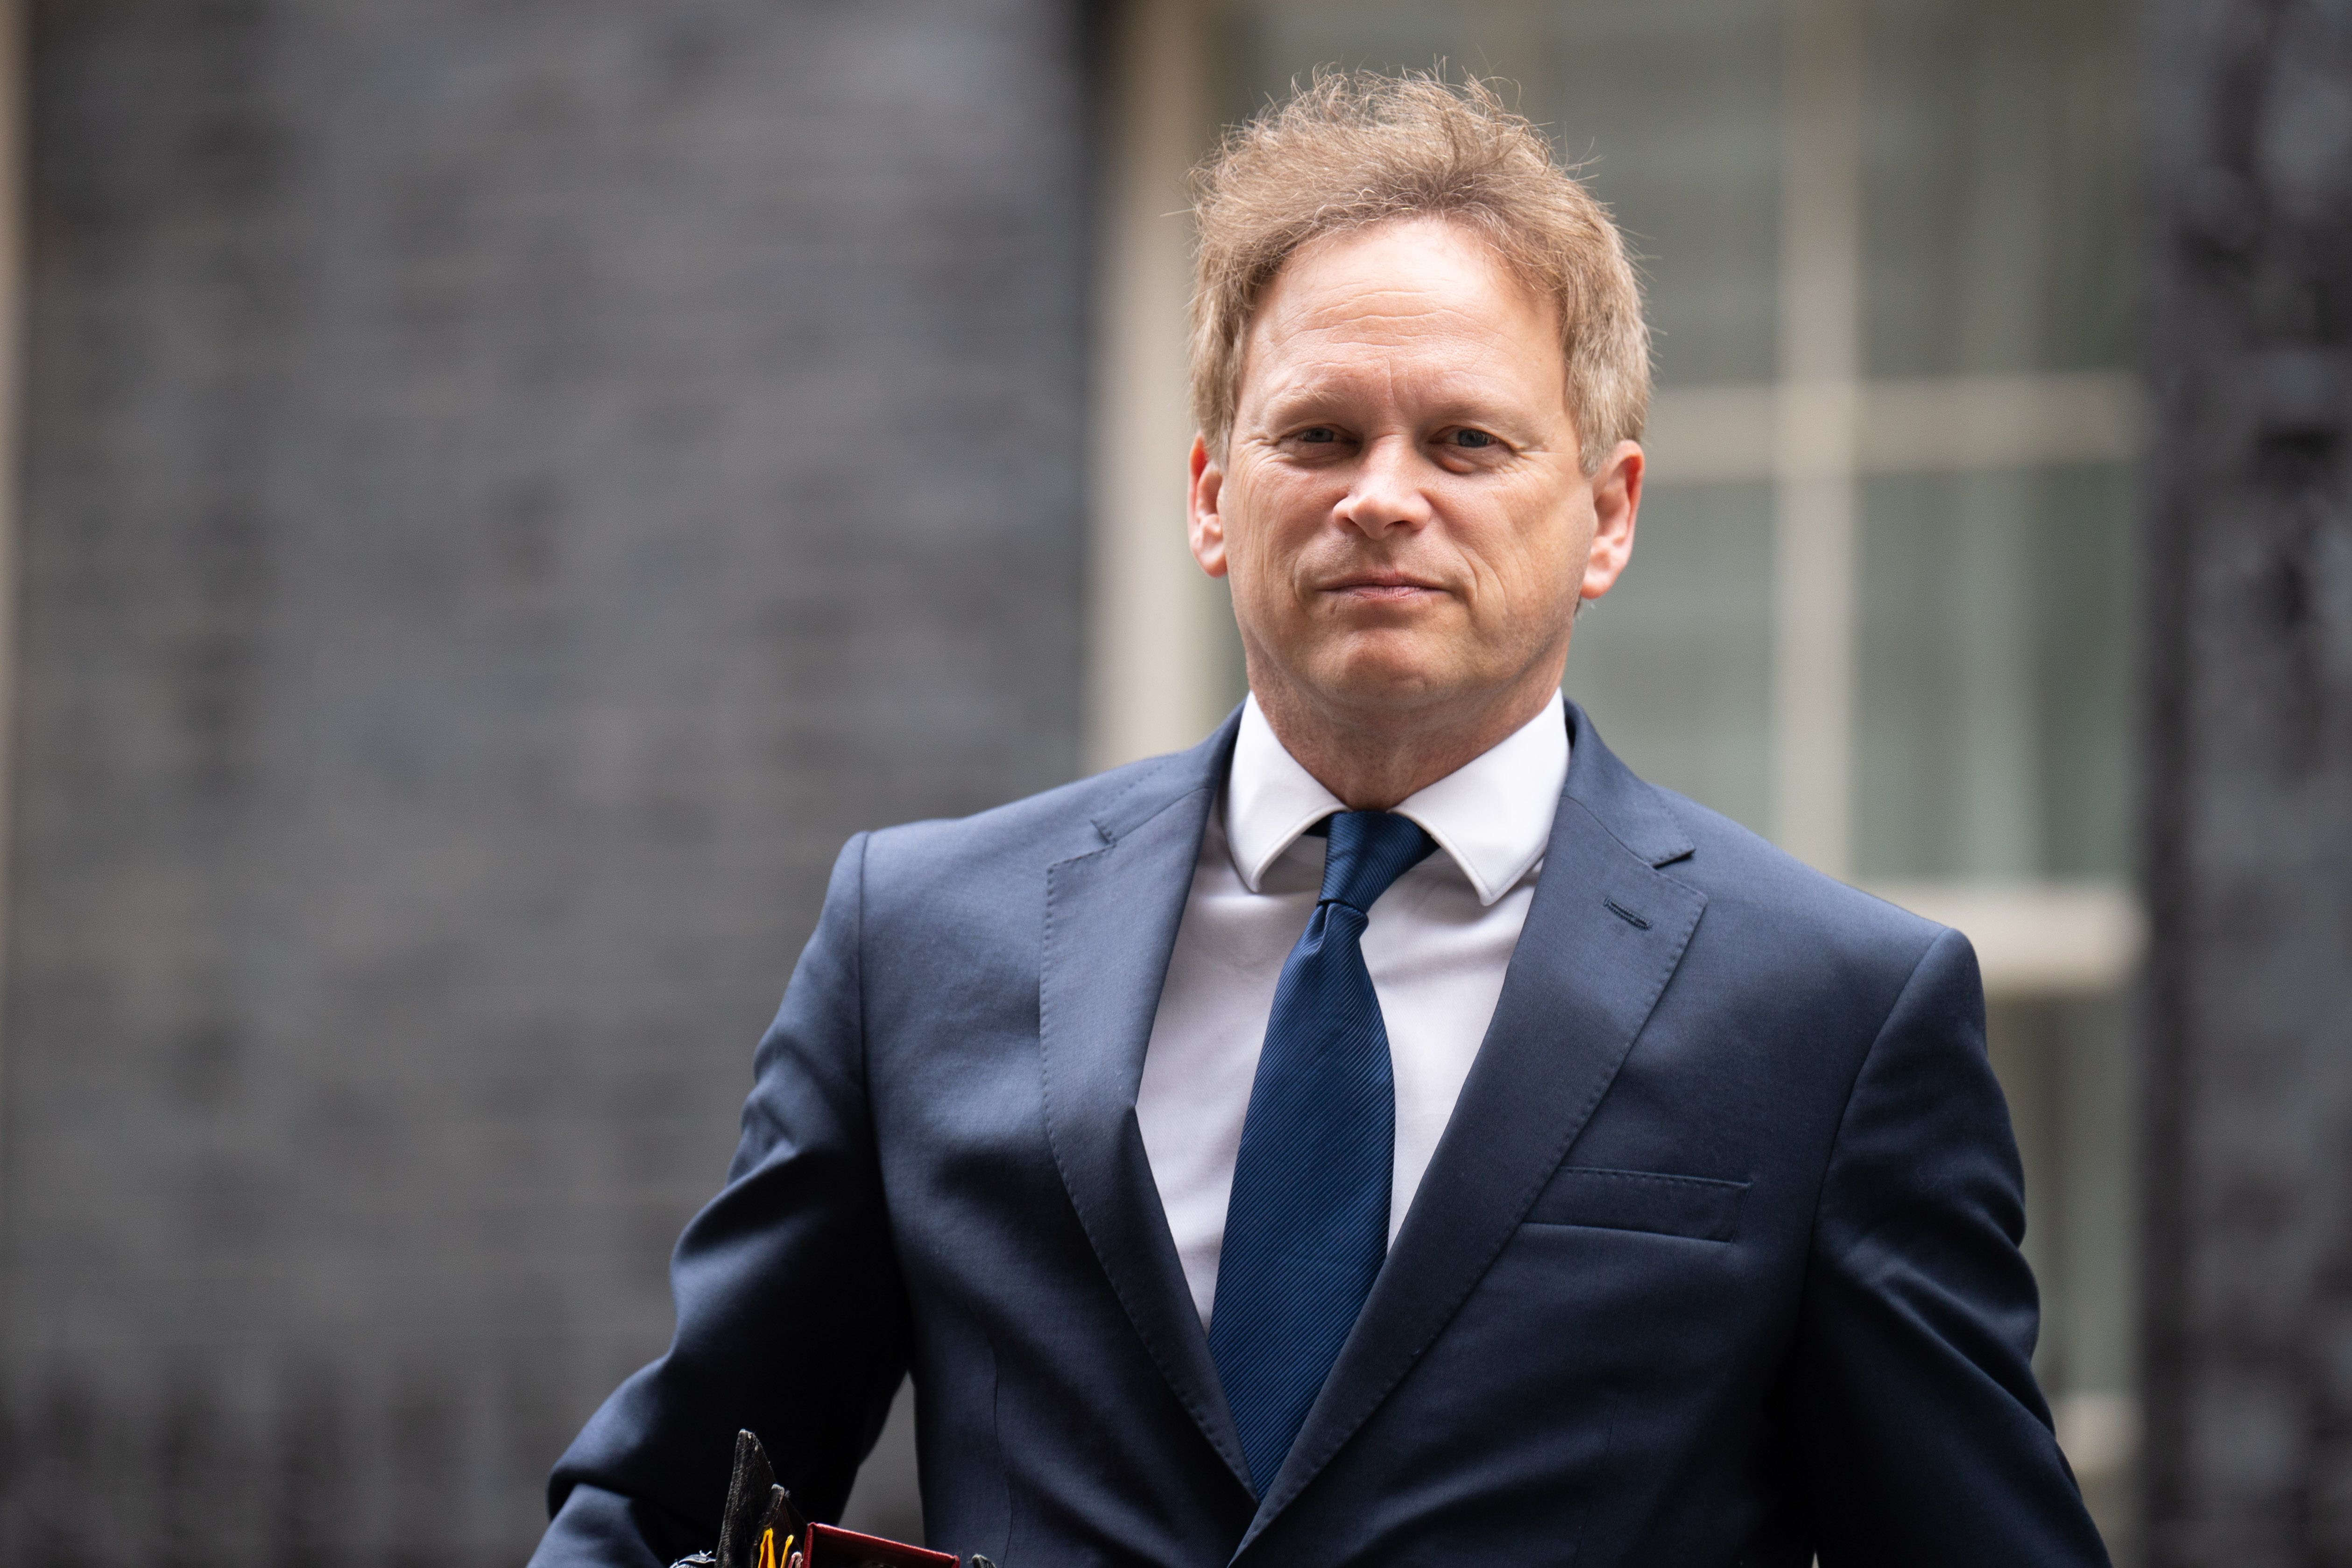 Space-based solar power could help tackle climate change, Energy Security Secretary Grant Shapps said as he promised ?4.3m for research projects (James Manning/PA)